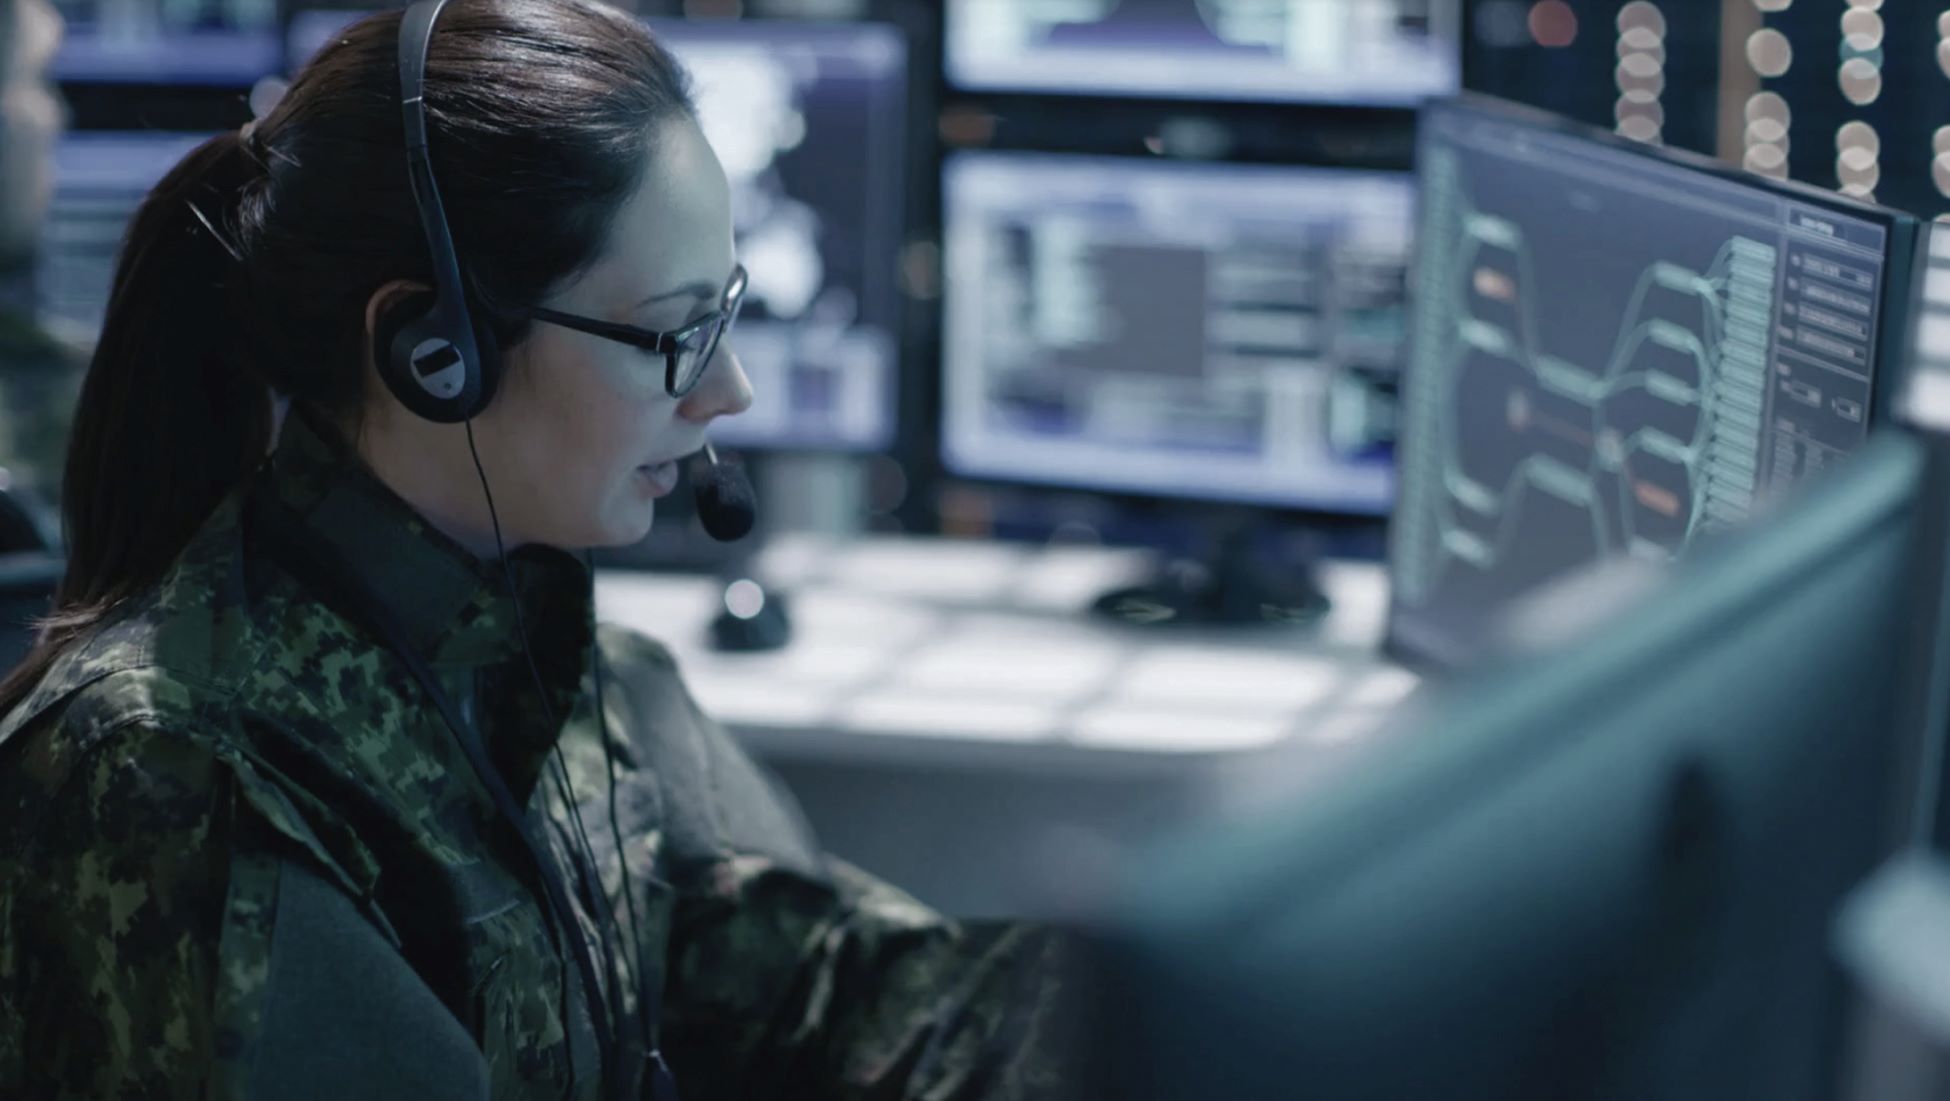 Royal Netherlands Airforce selects FREQUENTIS secure voice communication system 